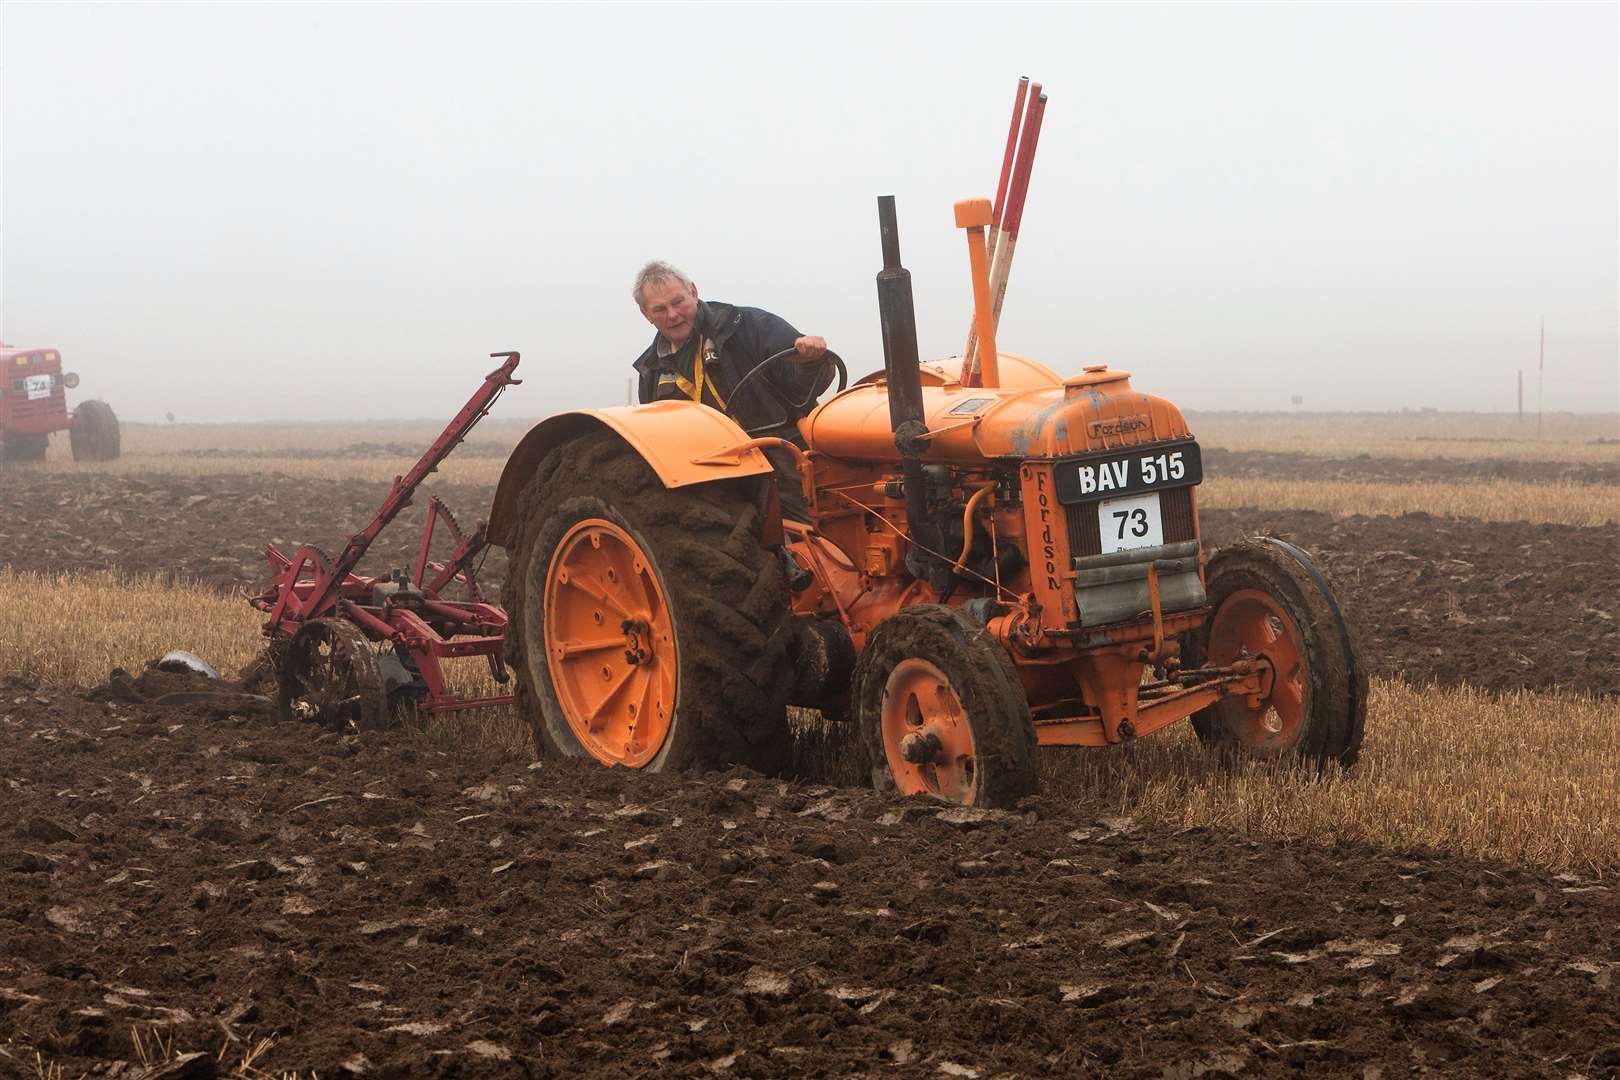 Richard MacWilliam, Muir of Ord competing in the vintage trailing section with his McCormick-Deering plough and Fordson N tractor. Photo: Robert MacDonald/Northern Studios